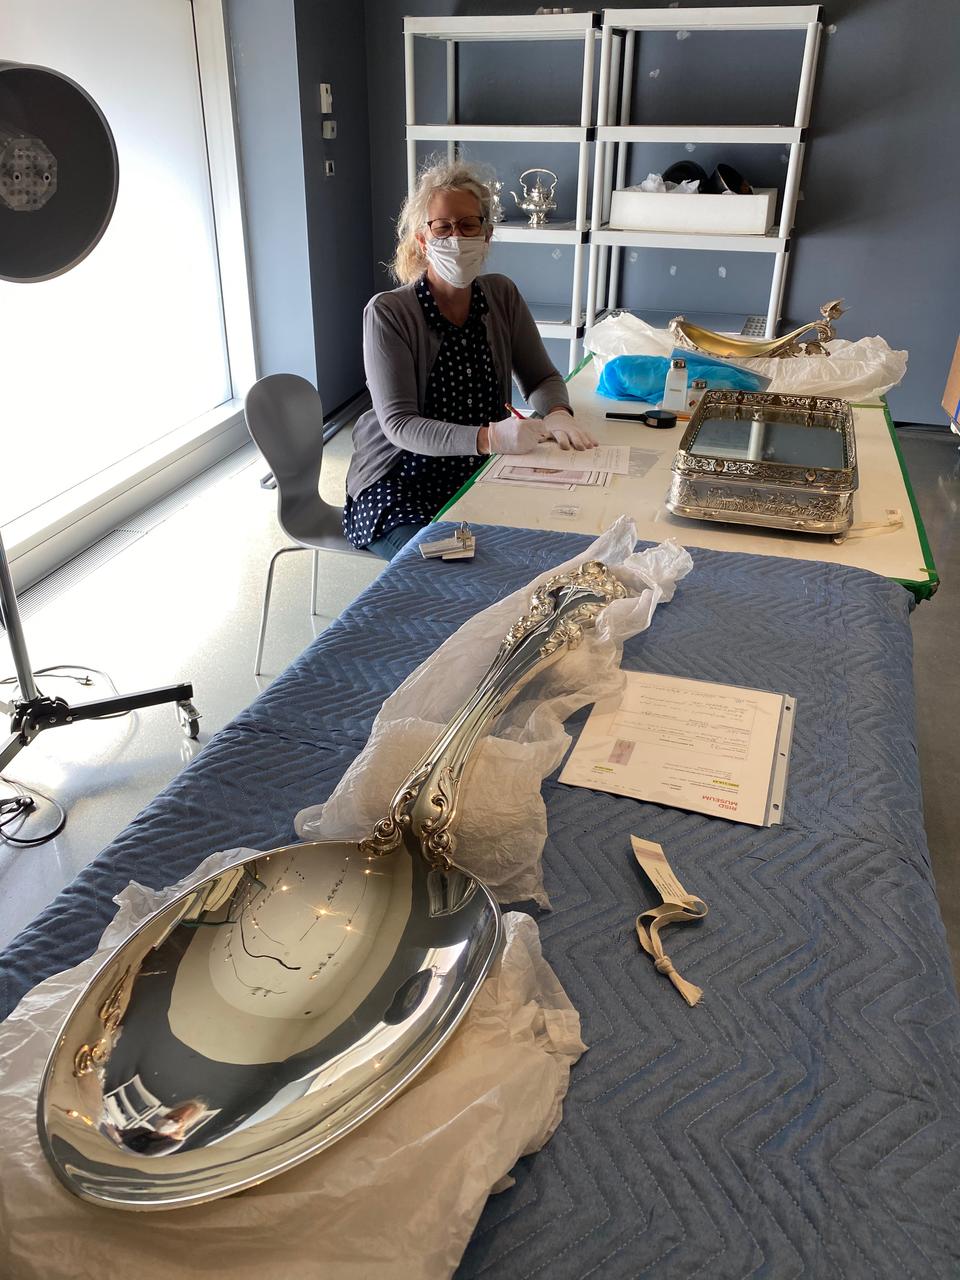 A masked museum worker sits at a table with several objects. The work dominating the foreground is an enormous shiny silver spoon.